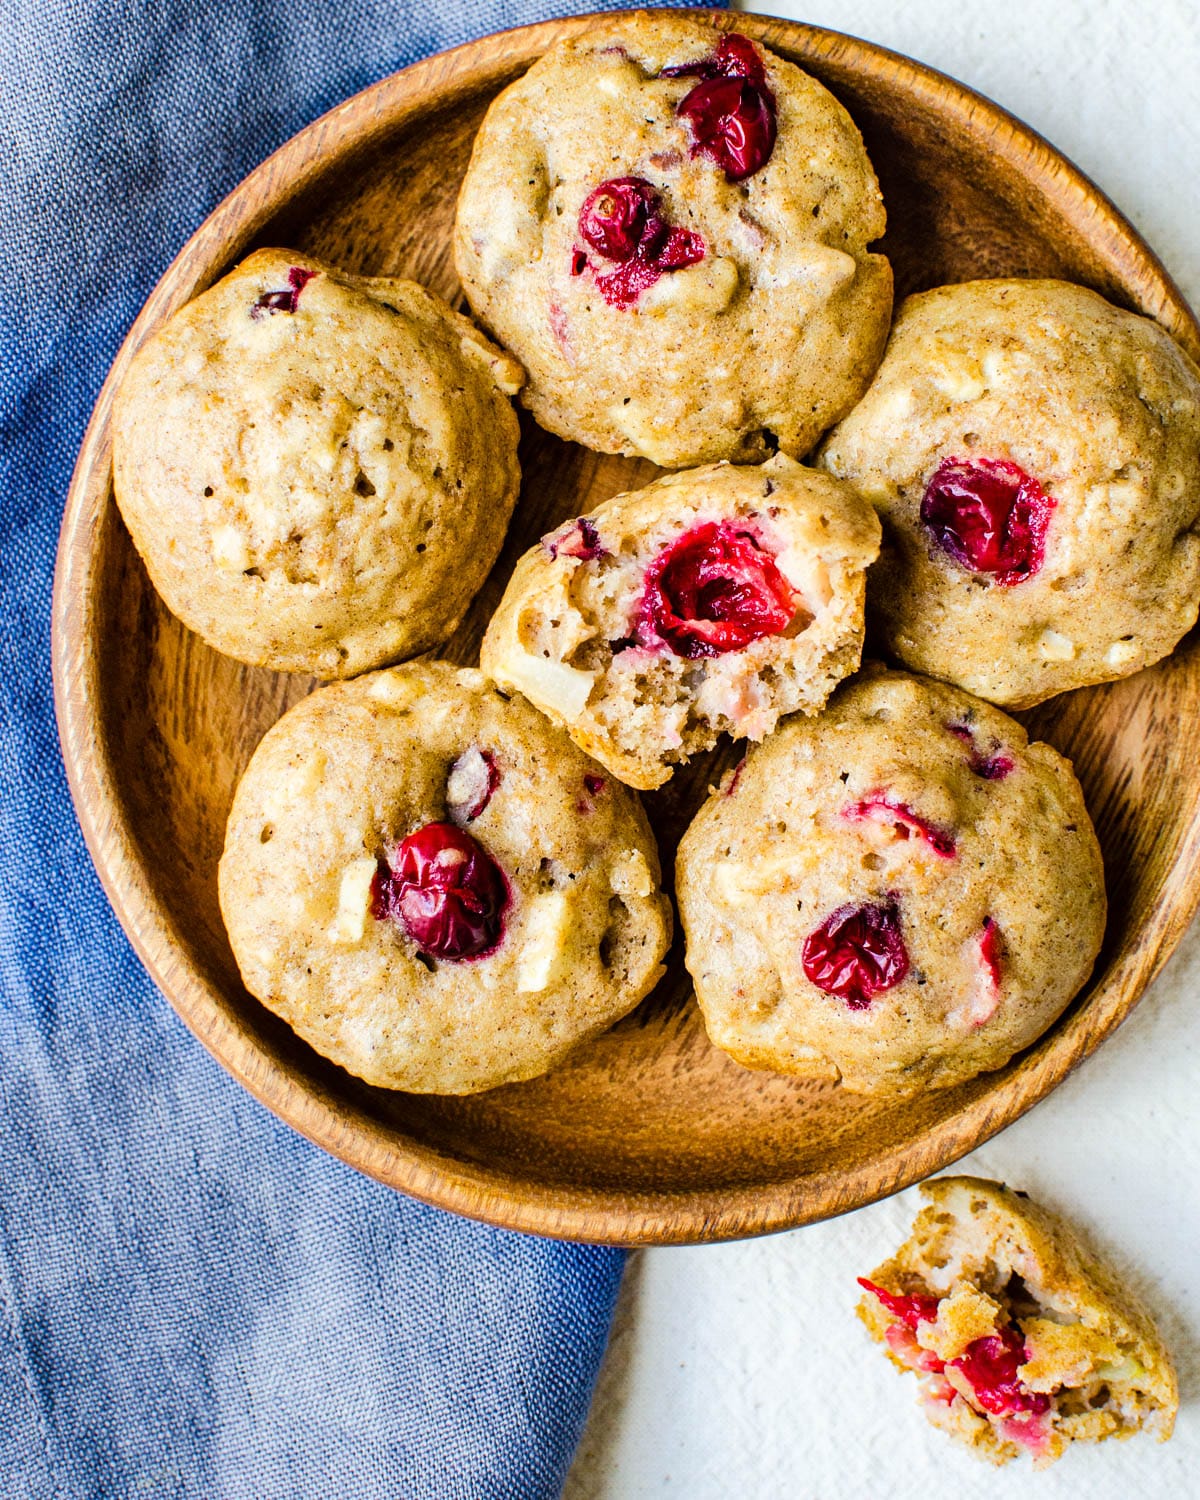 bran muffins with cranberries.